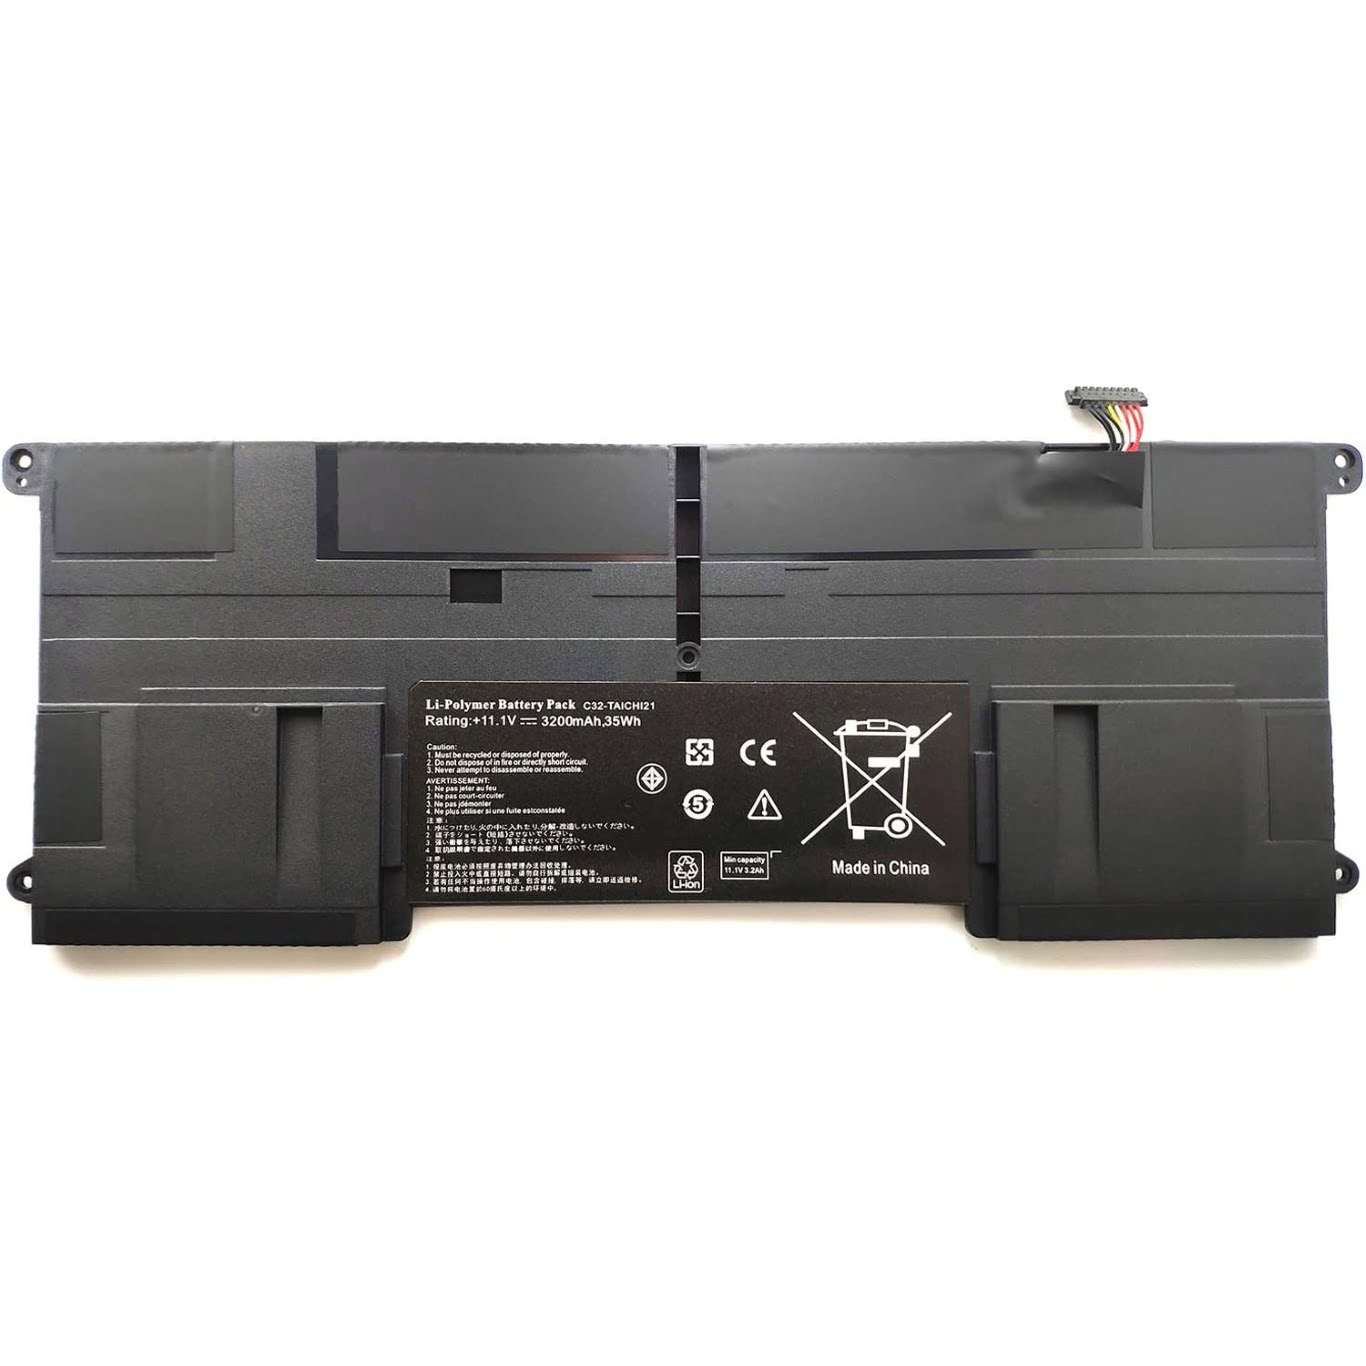 0B200-00170000M, 0B200-00170100P replacement Laptop Battery for Asus 3568A-Taichi 21, Taichi 21, 11.1V, 3200mah / 35wh